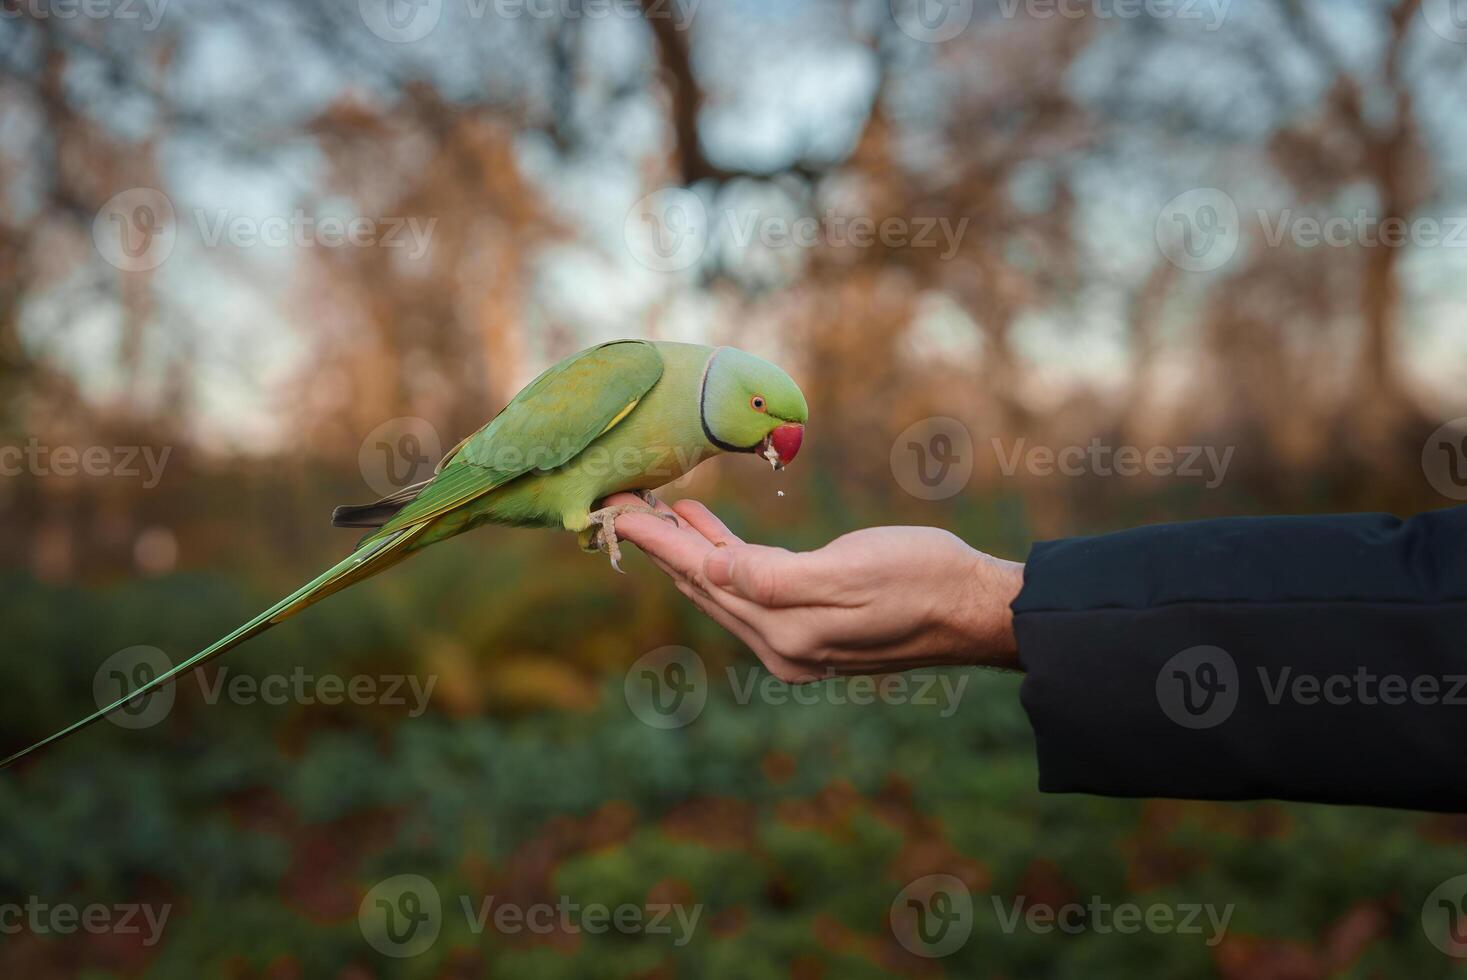 Parakeet with Green Feathers Feeds from a Hand in London's Chilly Winter Park photo